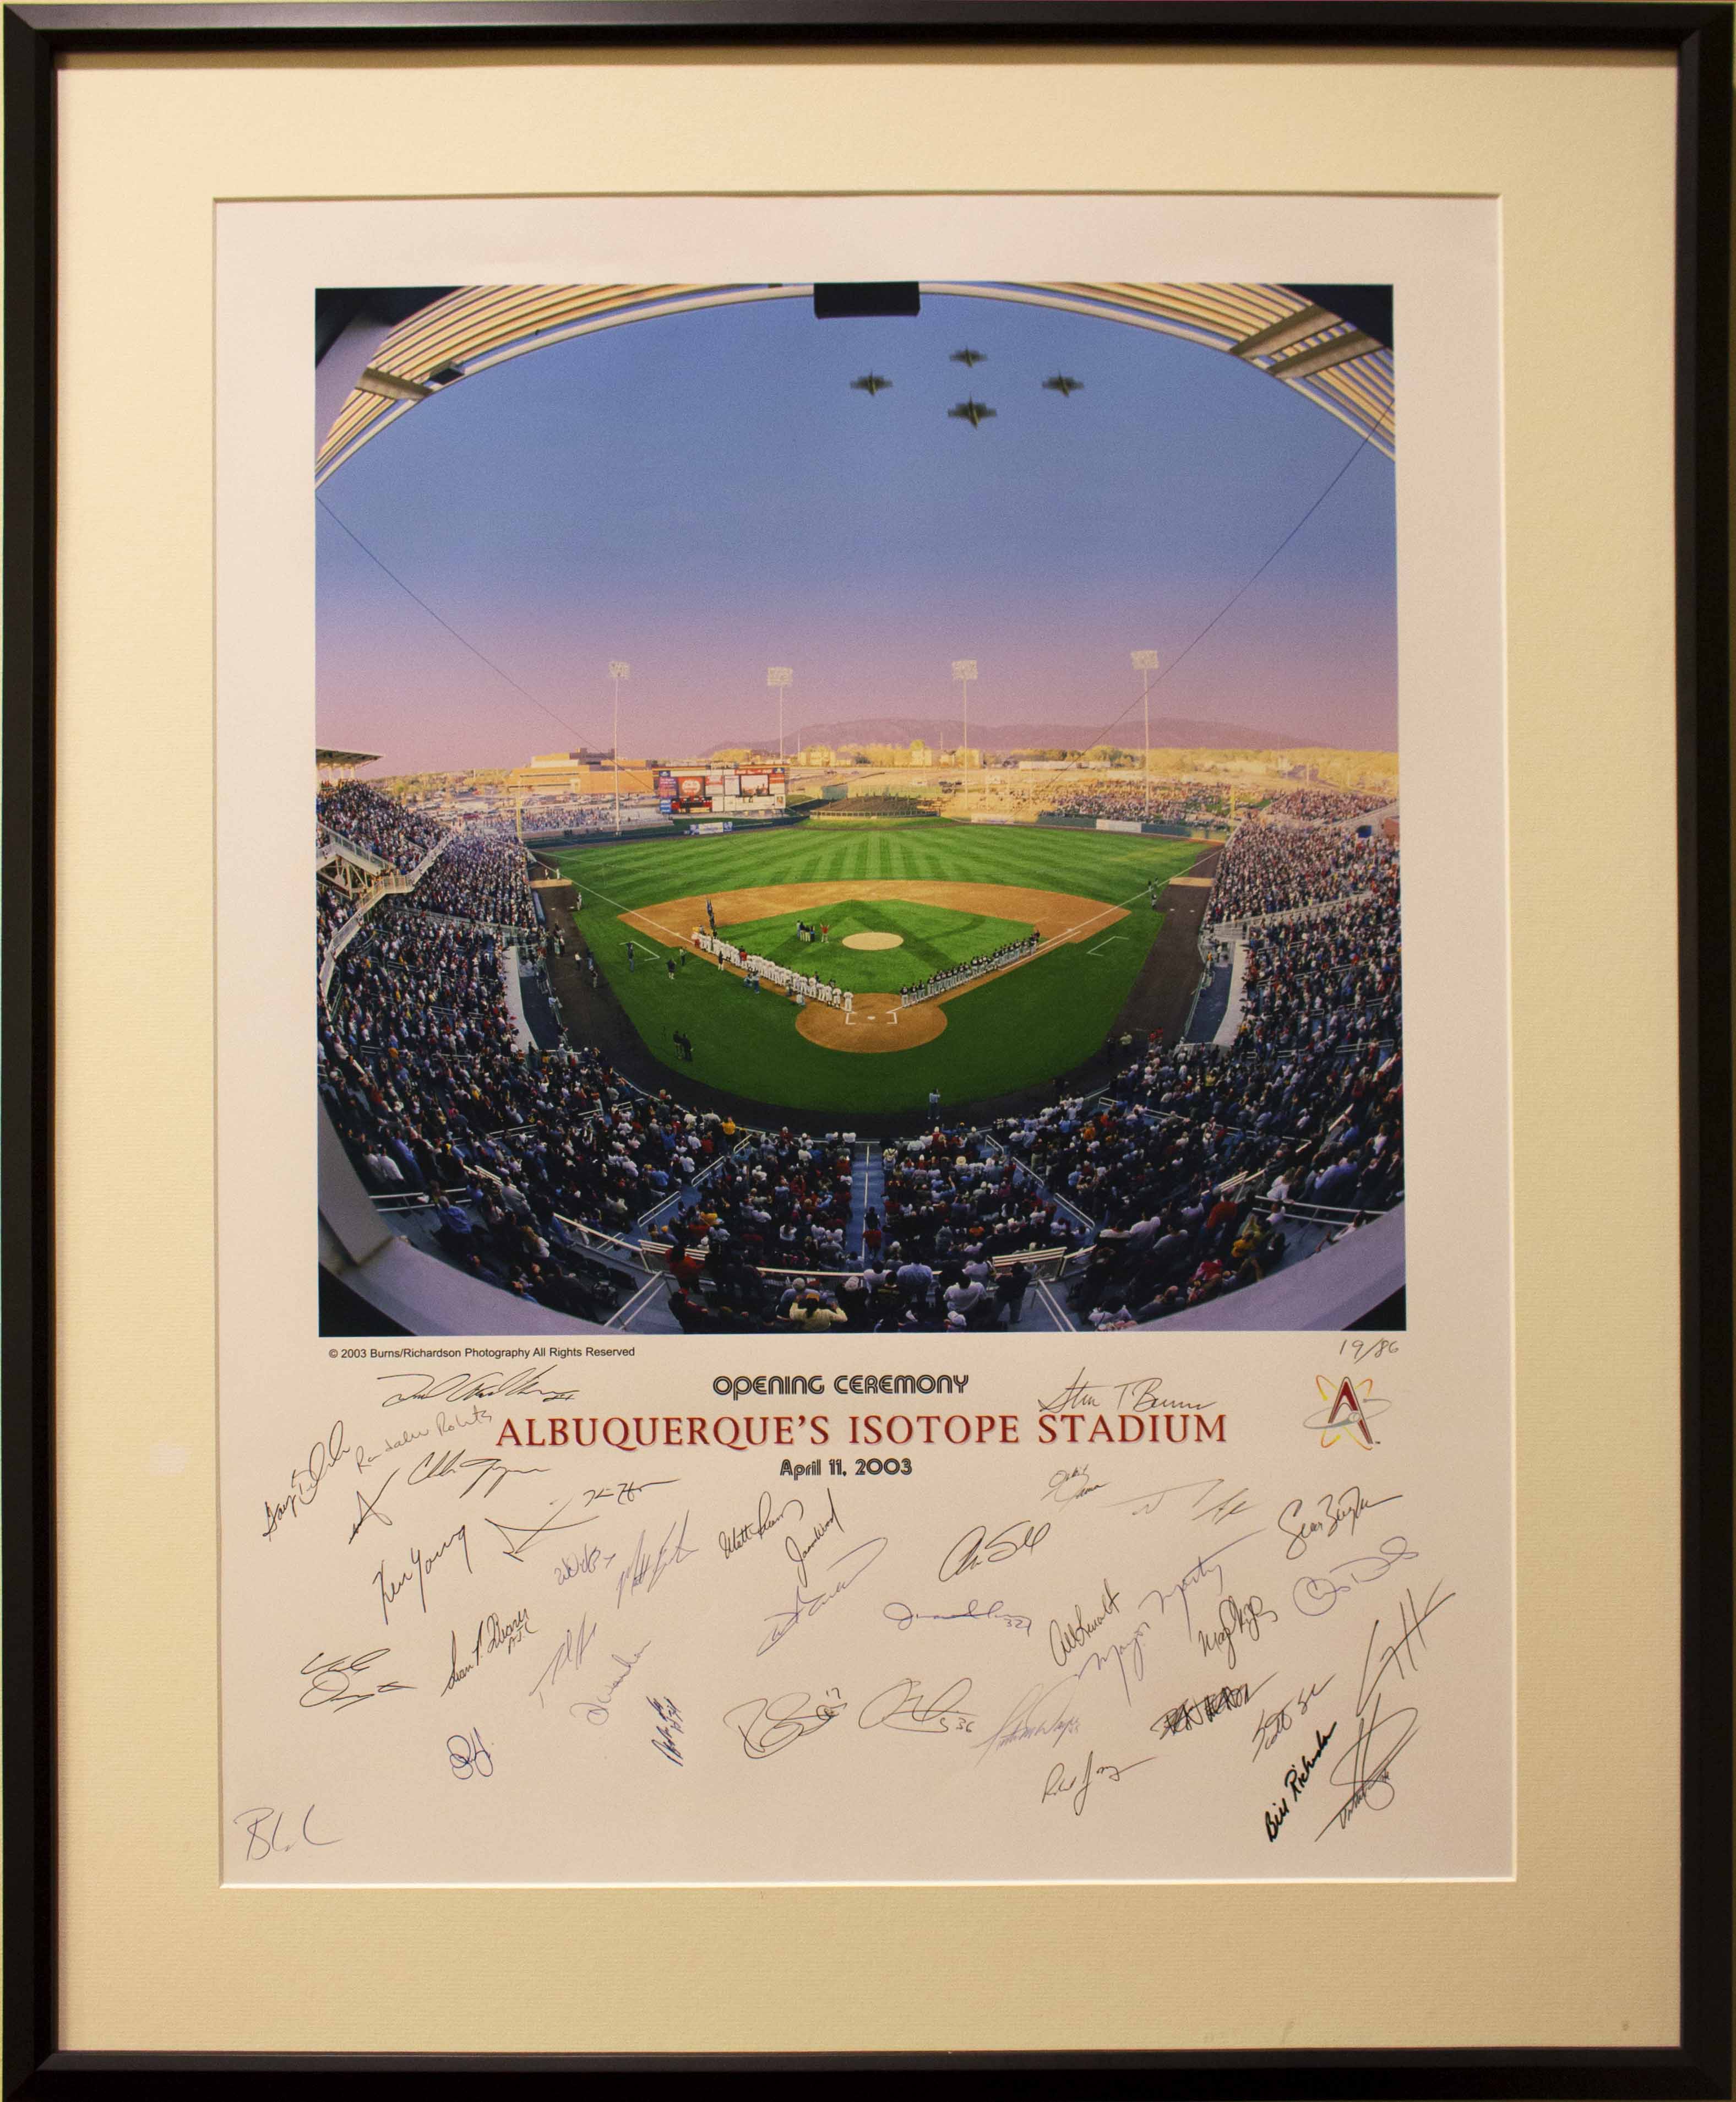 This is a print of the field at the opening ceremony of Albuquerque's minor league's stadium. Underneath the image are the team signatures. 